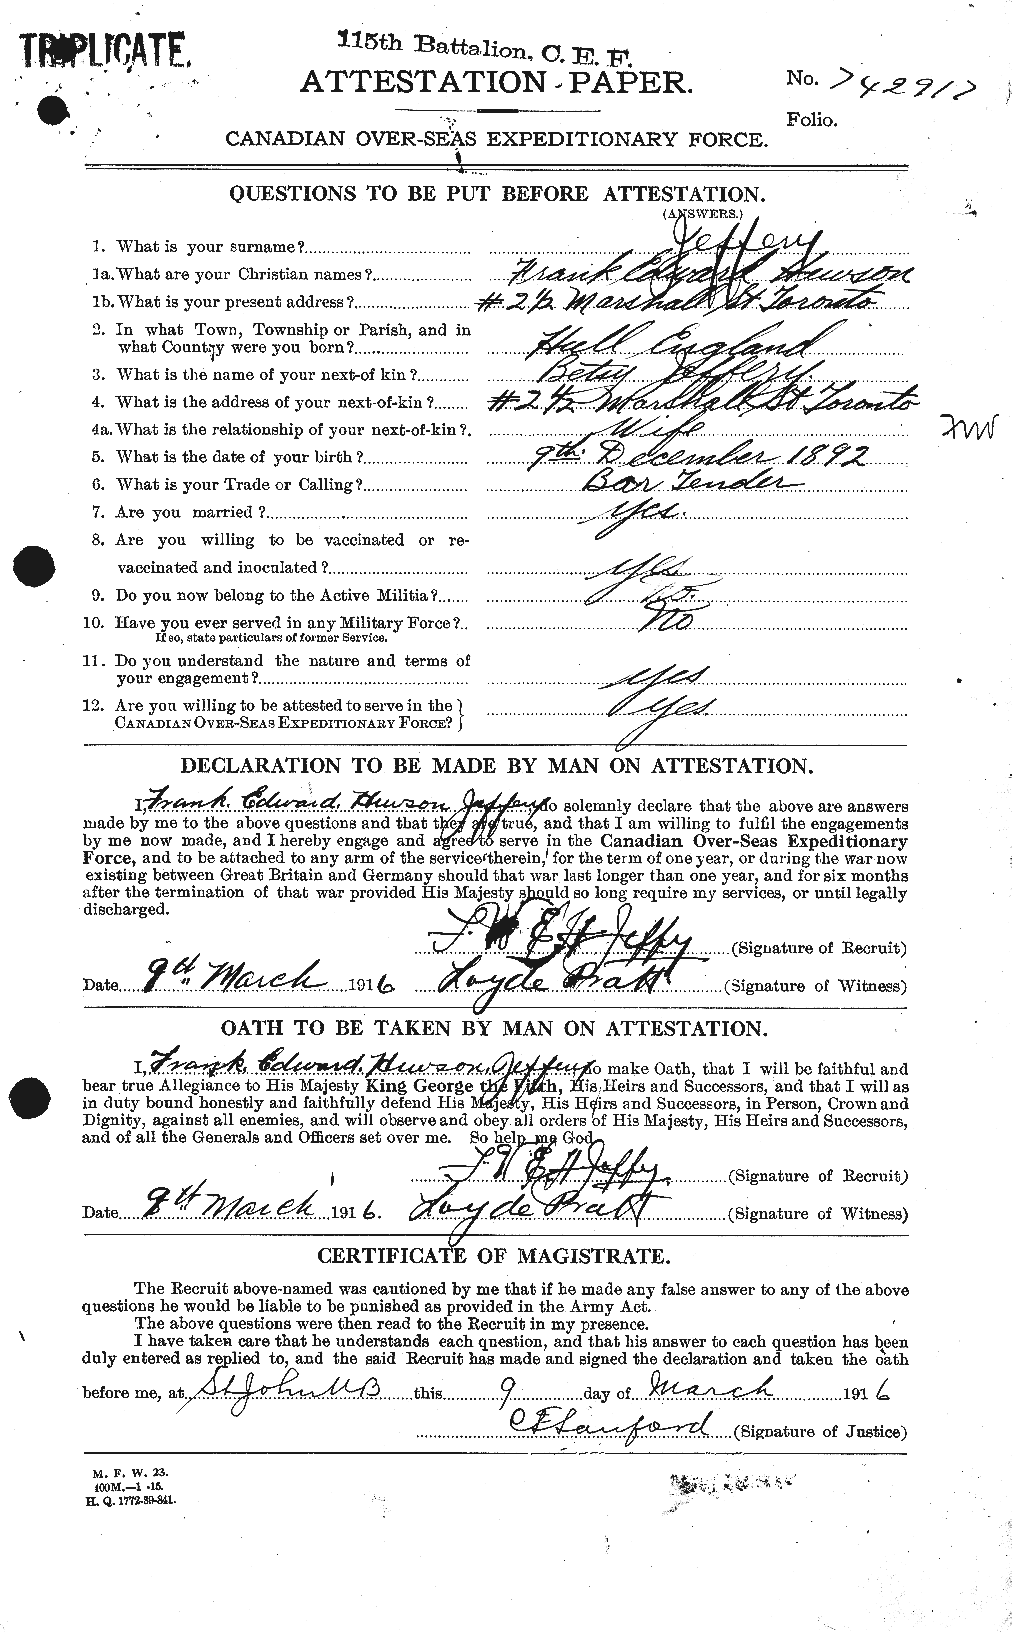 Personnel Records of the First World War - CEF 417744a